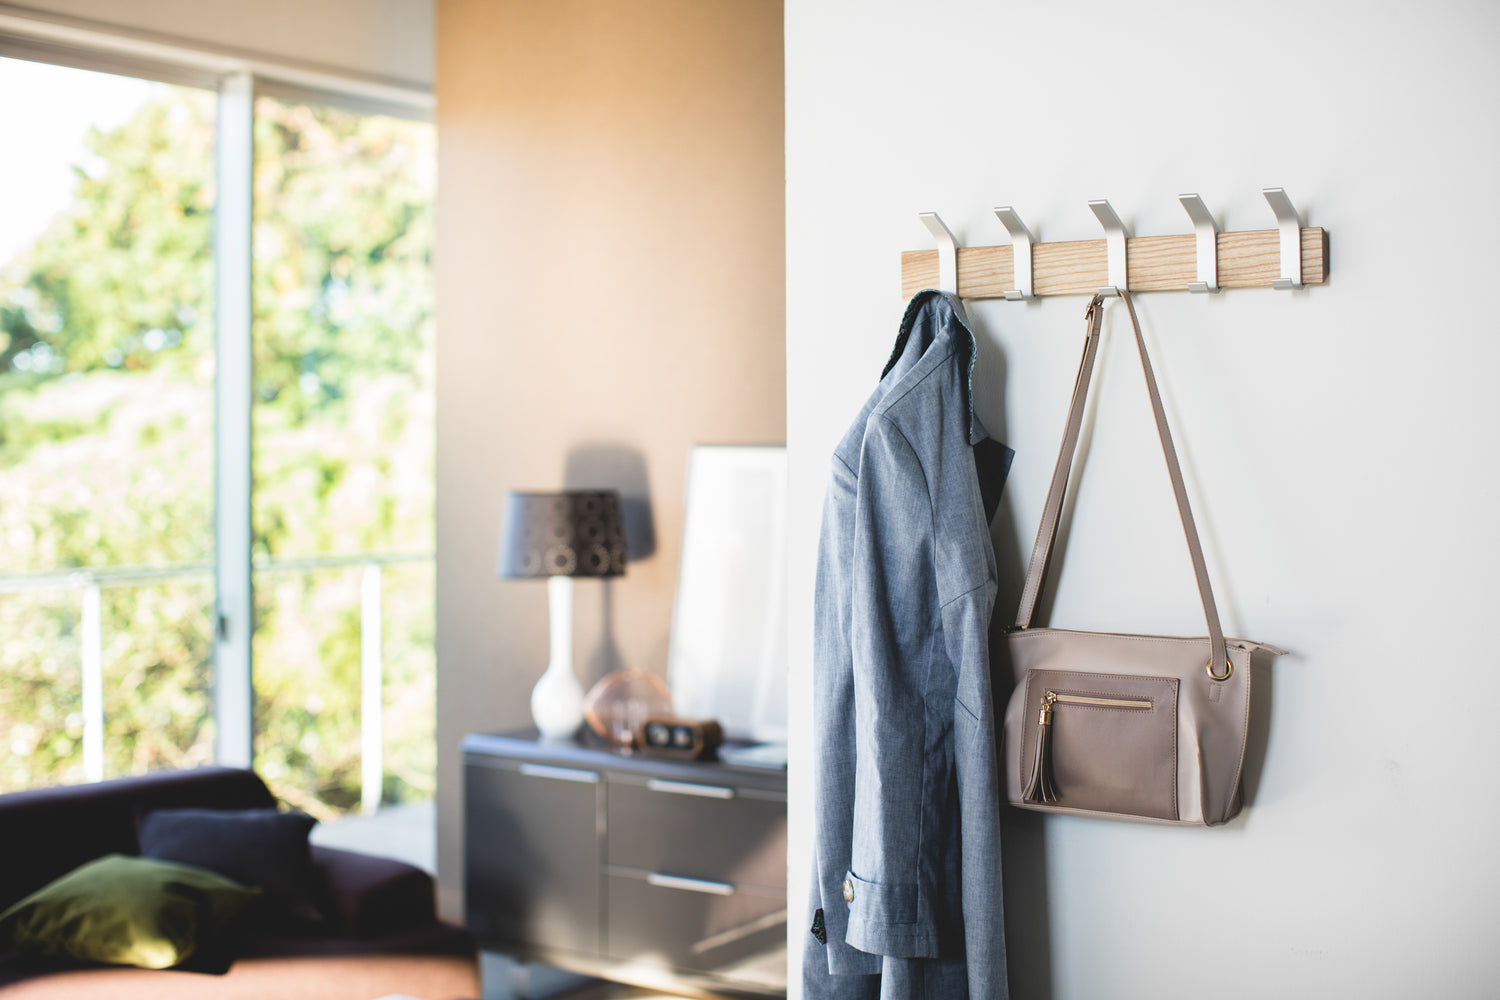 View 3 - Ash Wall-Mounted Coat Hanger holding jacket and purse by Yamazaki Home.